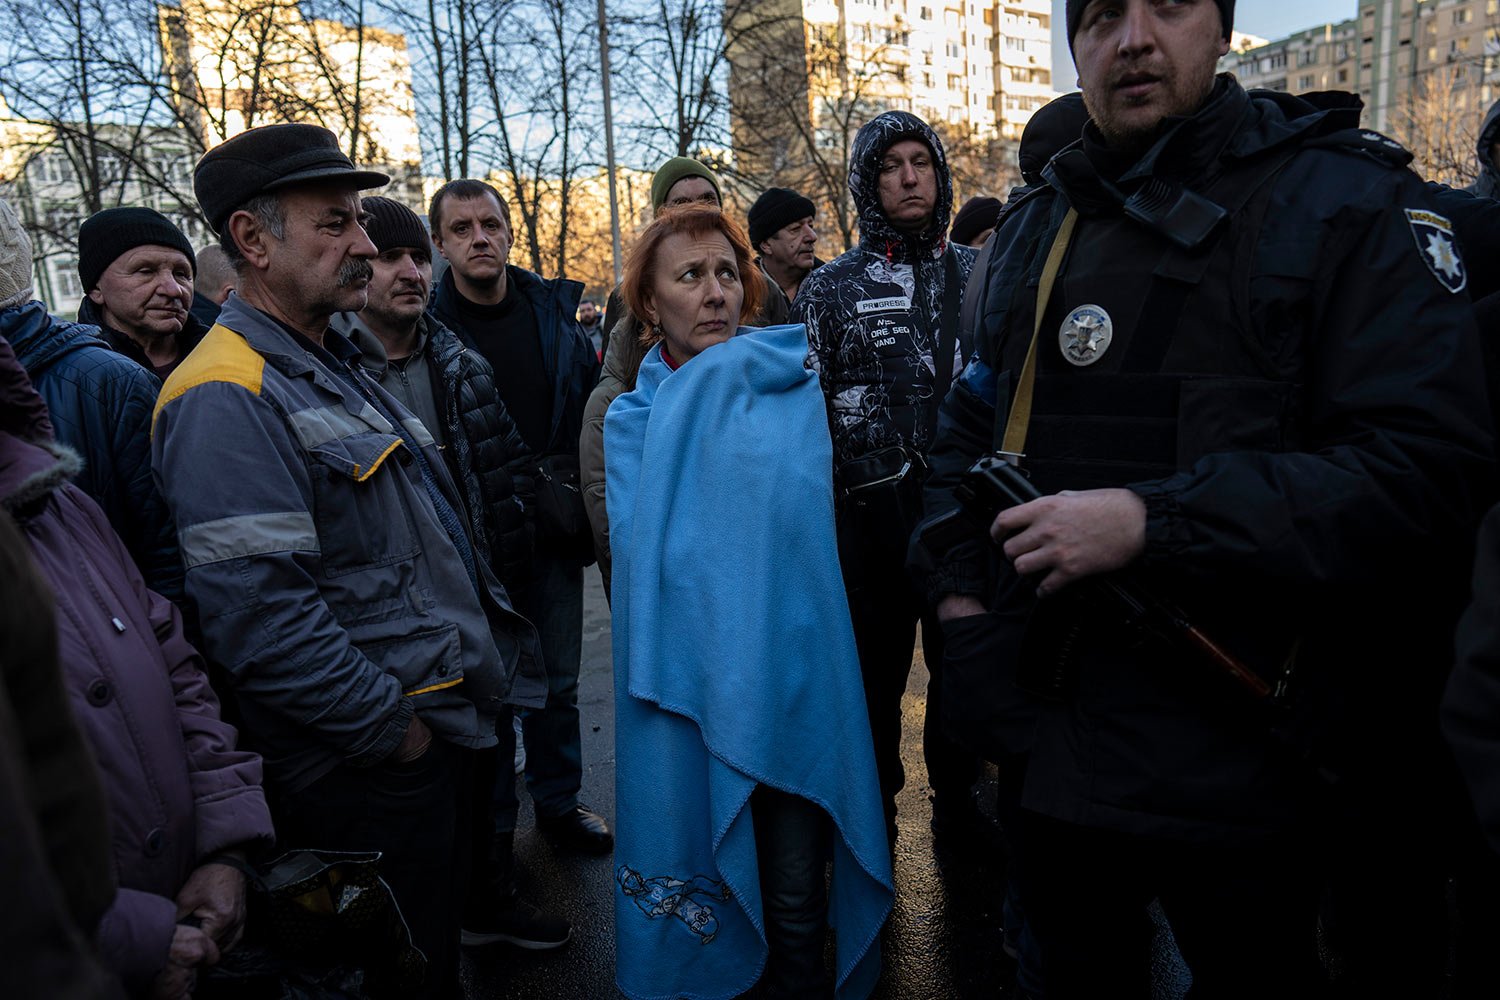  Natacha, center, listens to a policeman while waiting with other neighbors to be cleared to enter their apartments damaged by a bomb in Satoya neighborhood in Kyiv, Ukraine, Sunday, March 20, 2022. (AP Photo/Rodrigo Abd) 